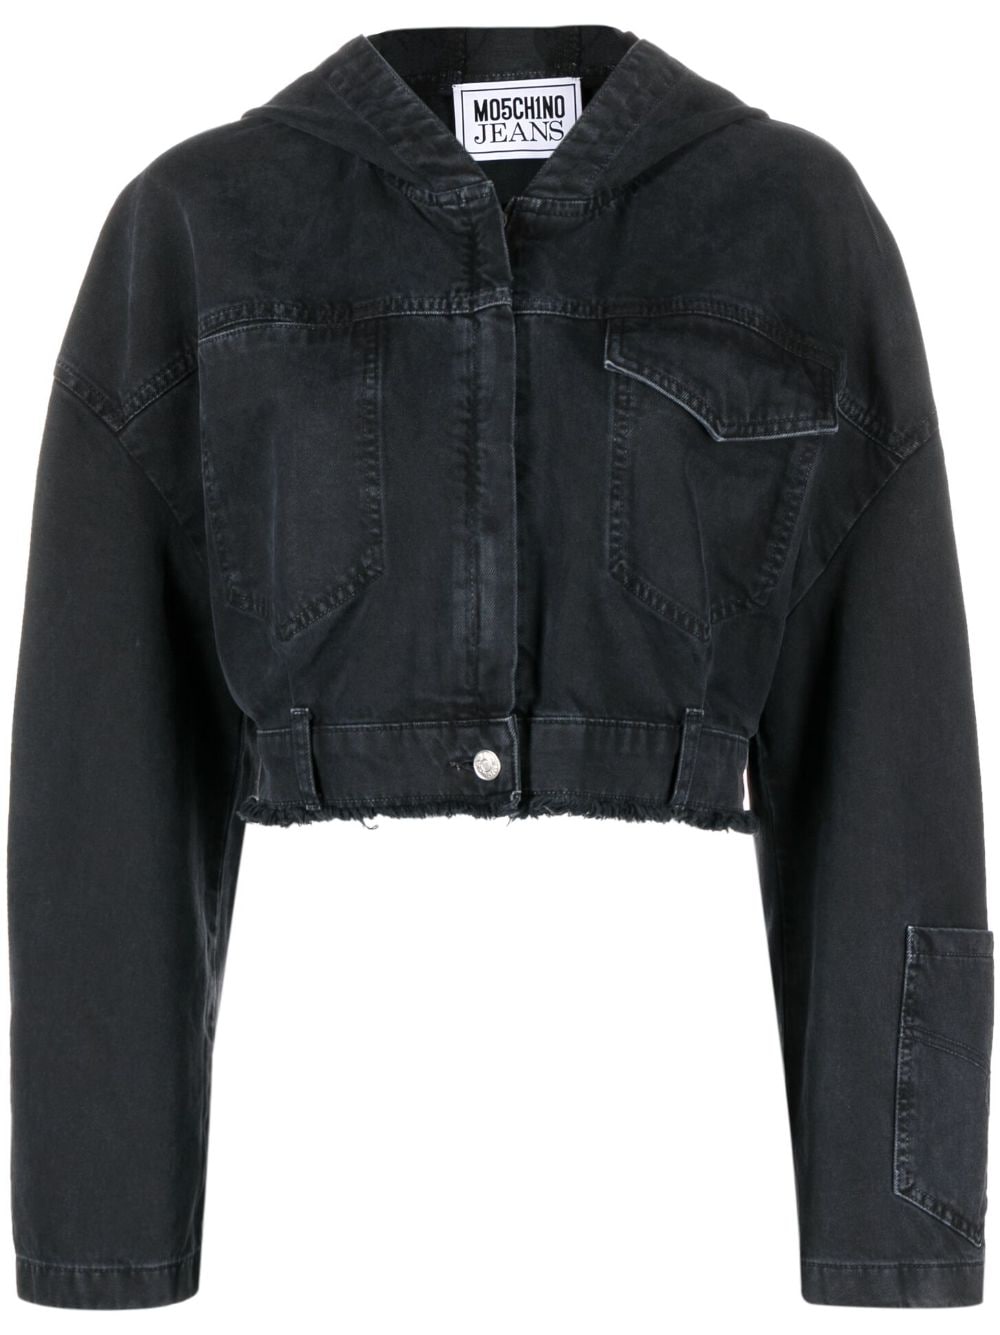 MOSCHINO JEANS cropped denim hooded jacket - Black